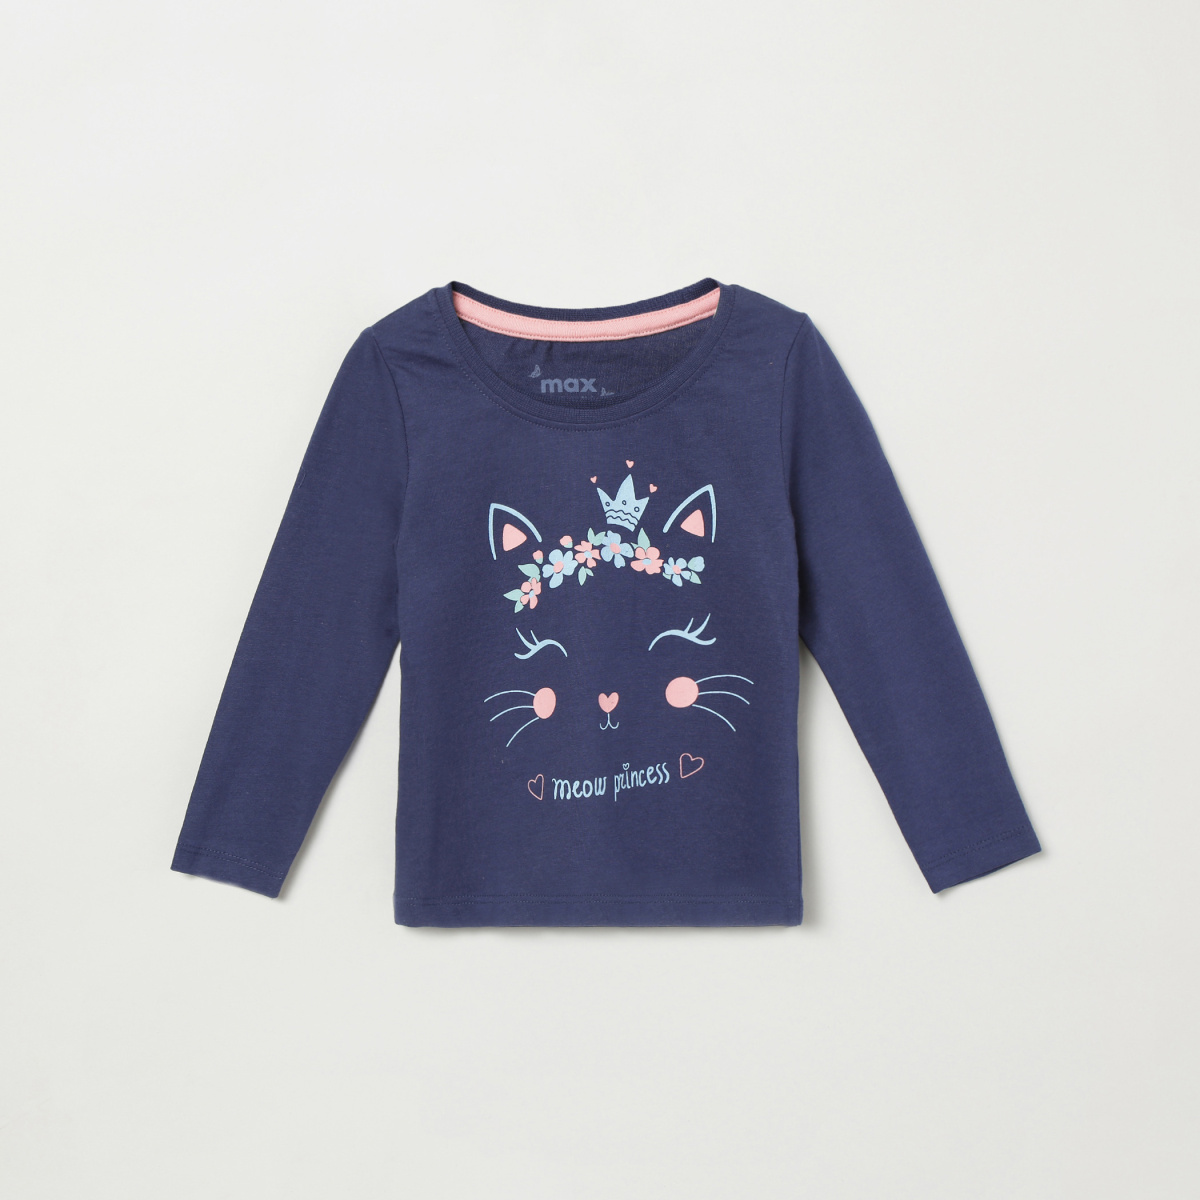 MAX Graphic Print T-shirt with Long Sleeves